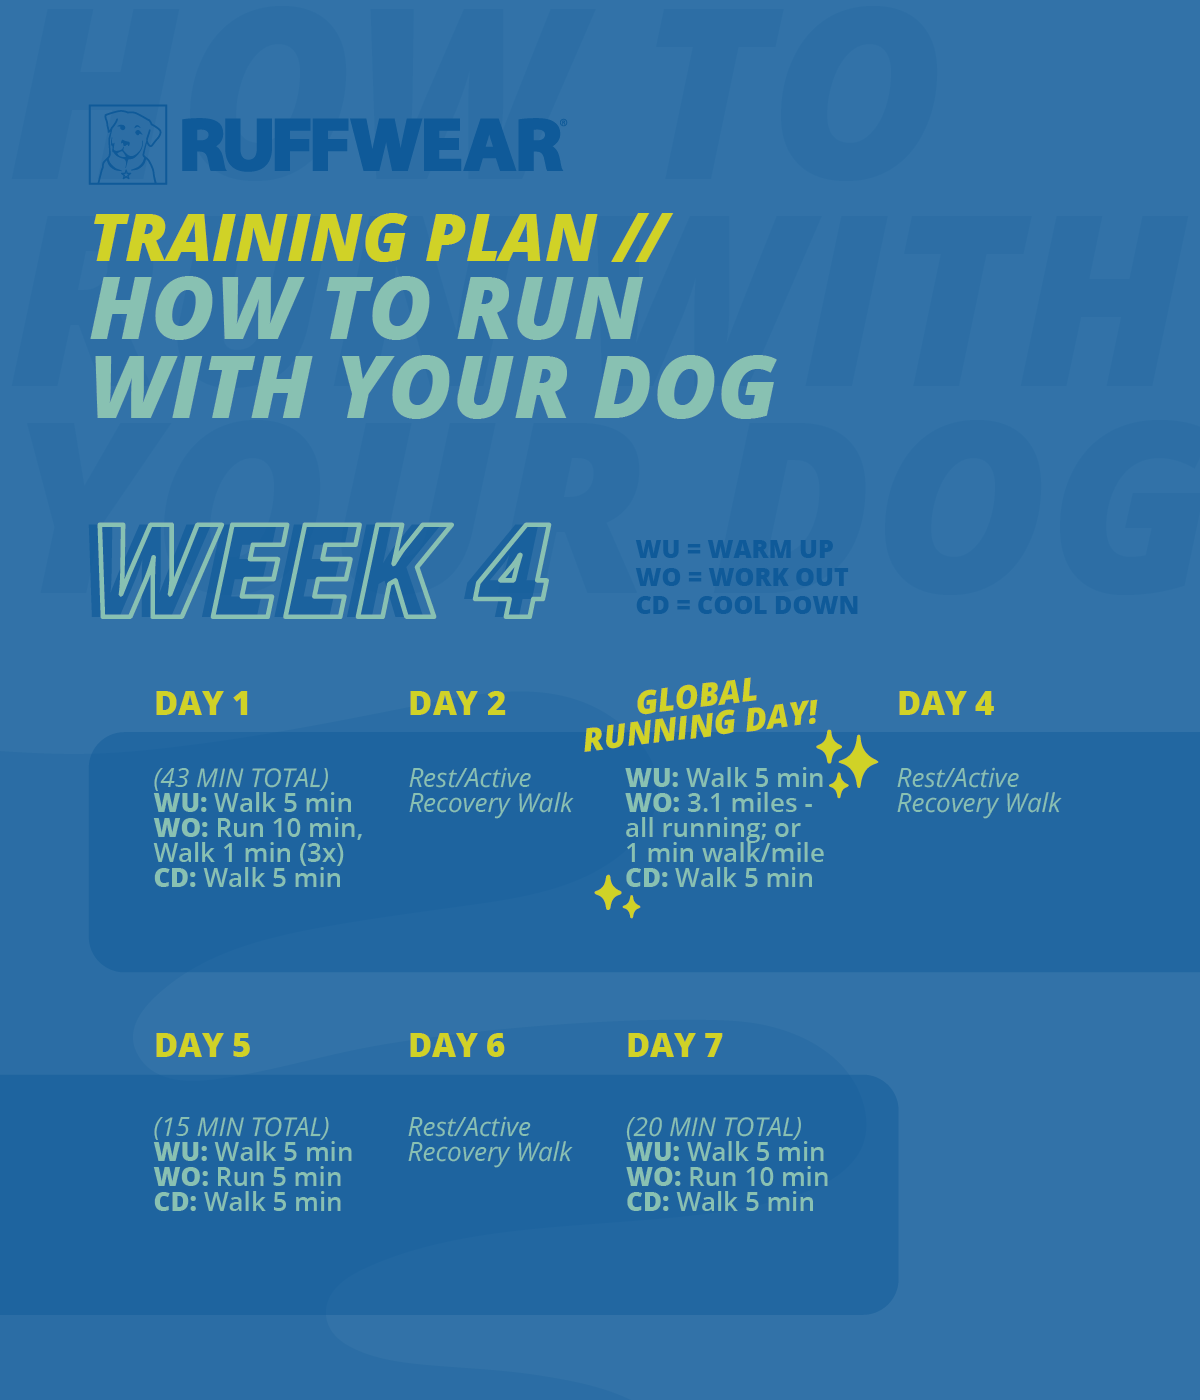 training plan for running with your dog week 4